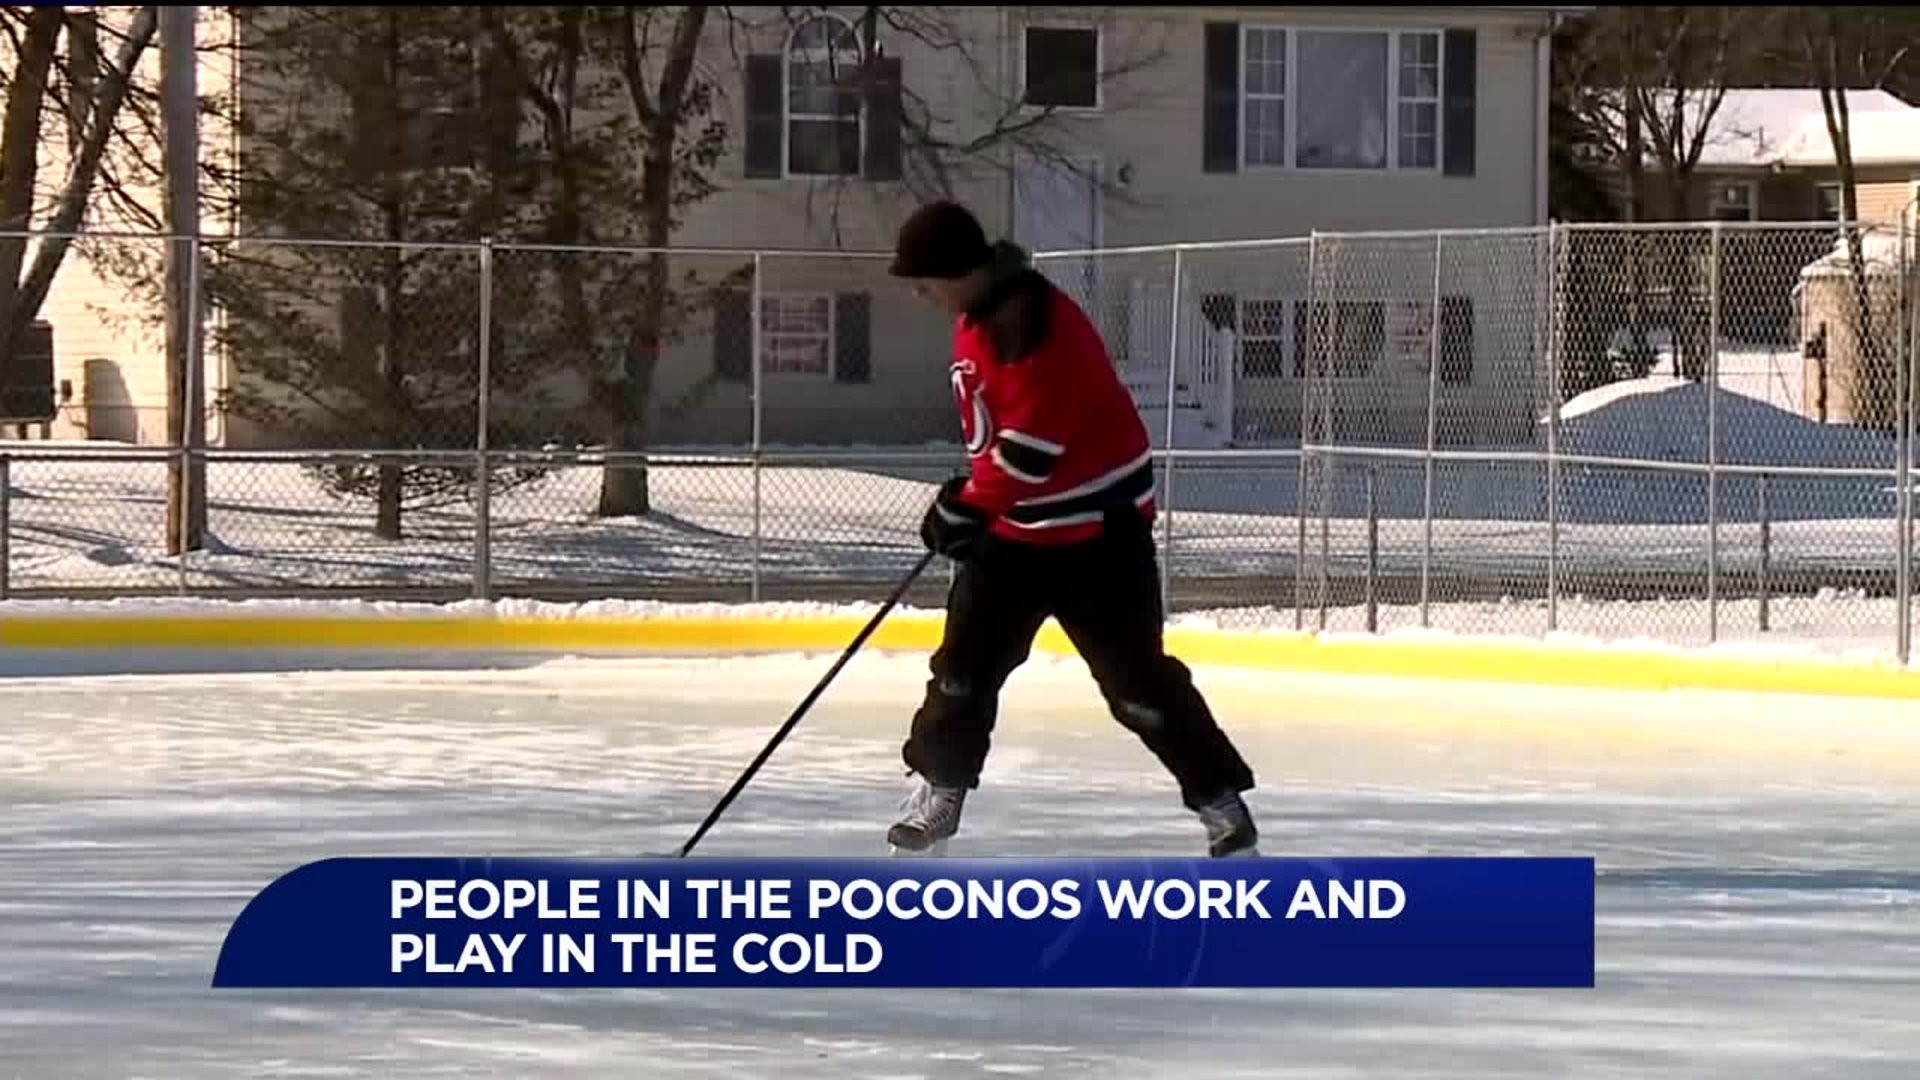 People in the Poconos Work and Play in the Cold